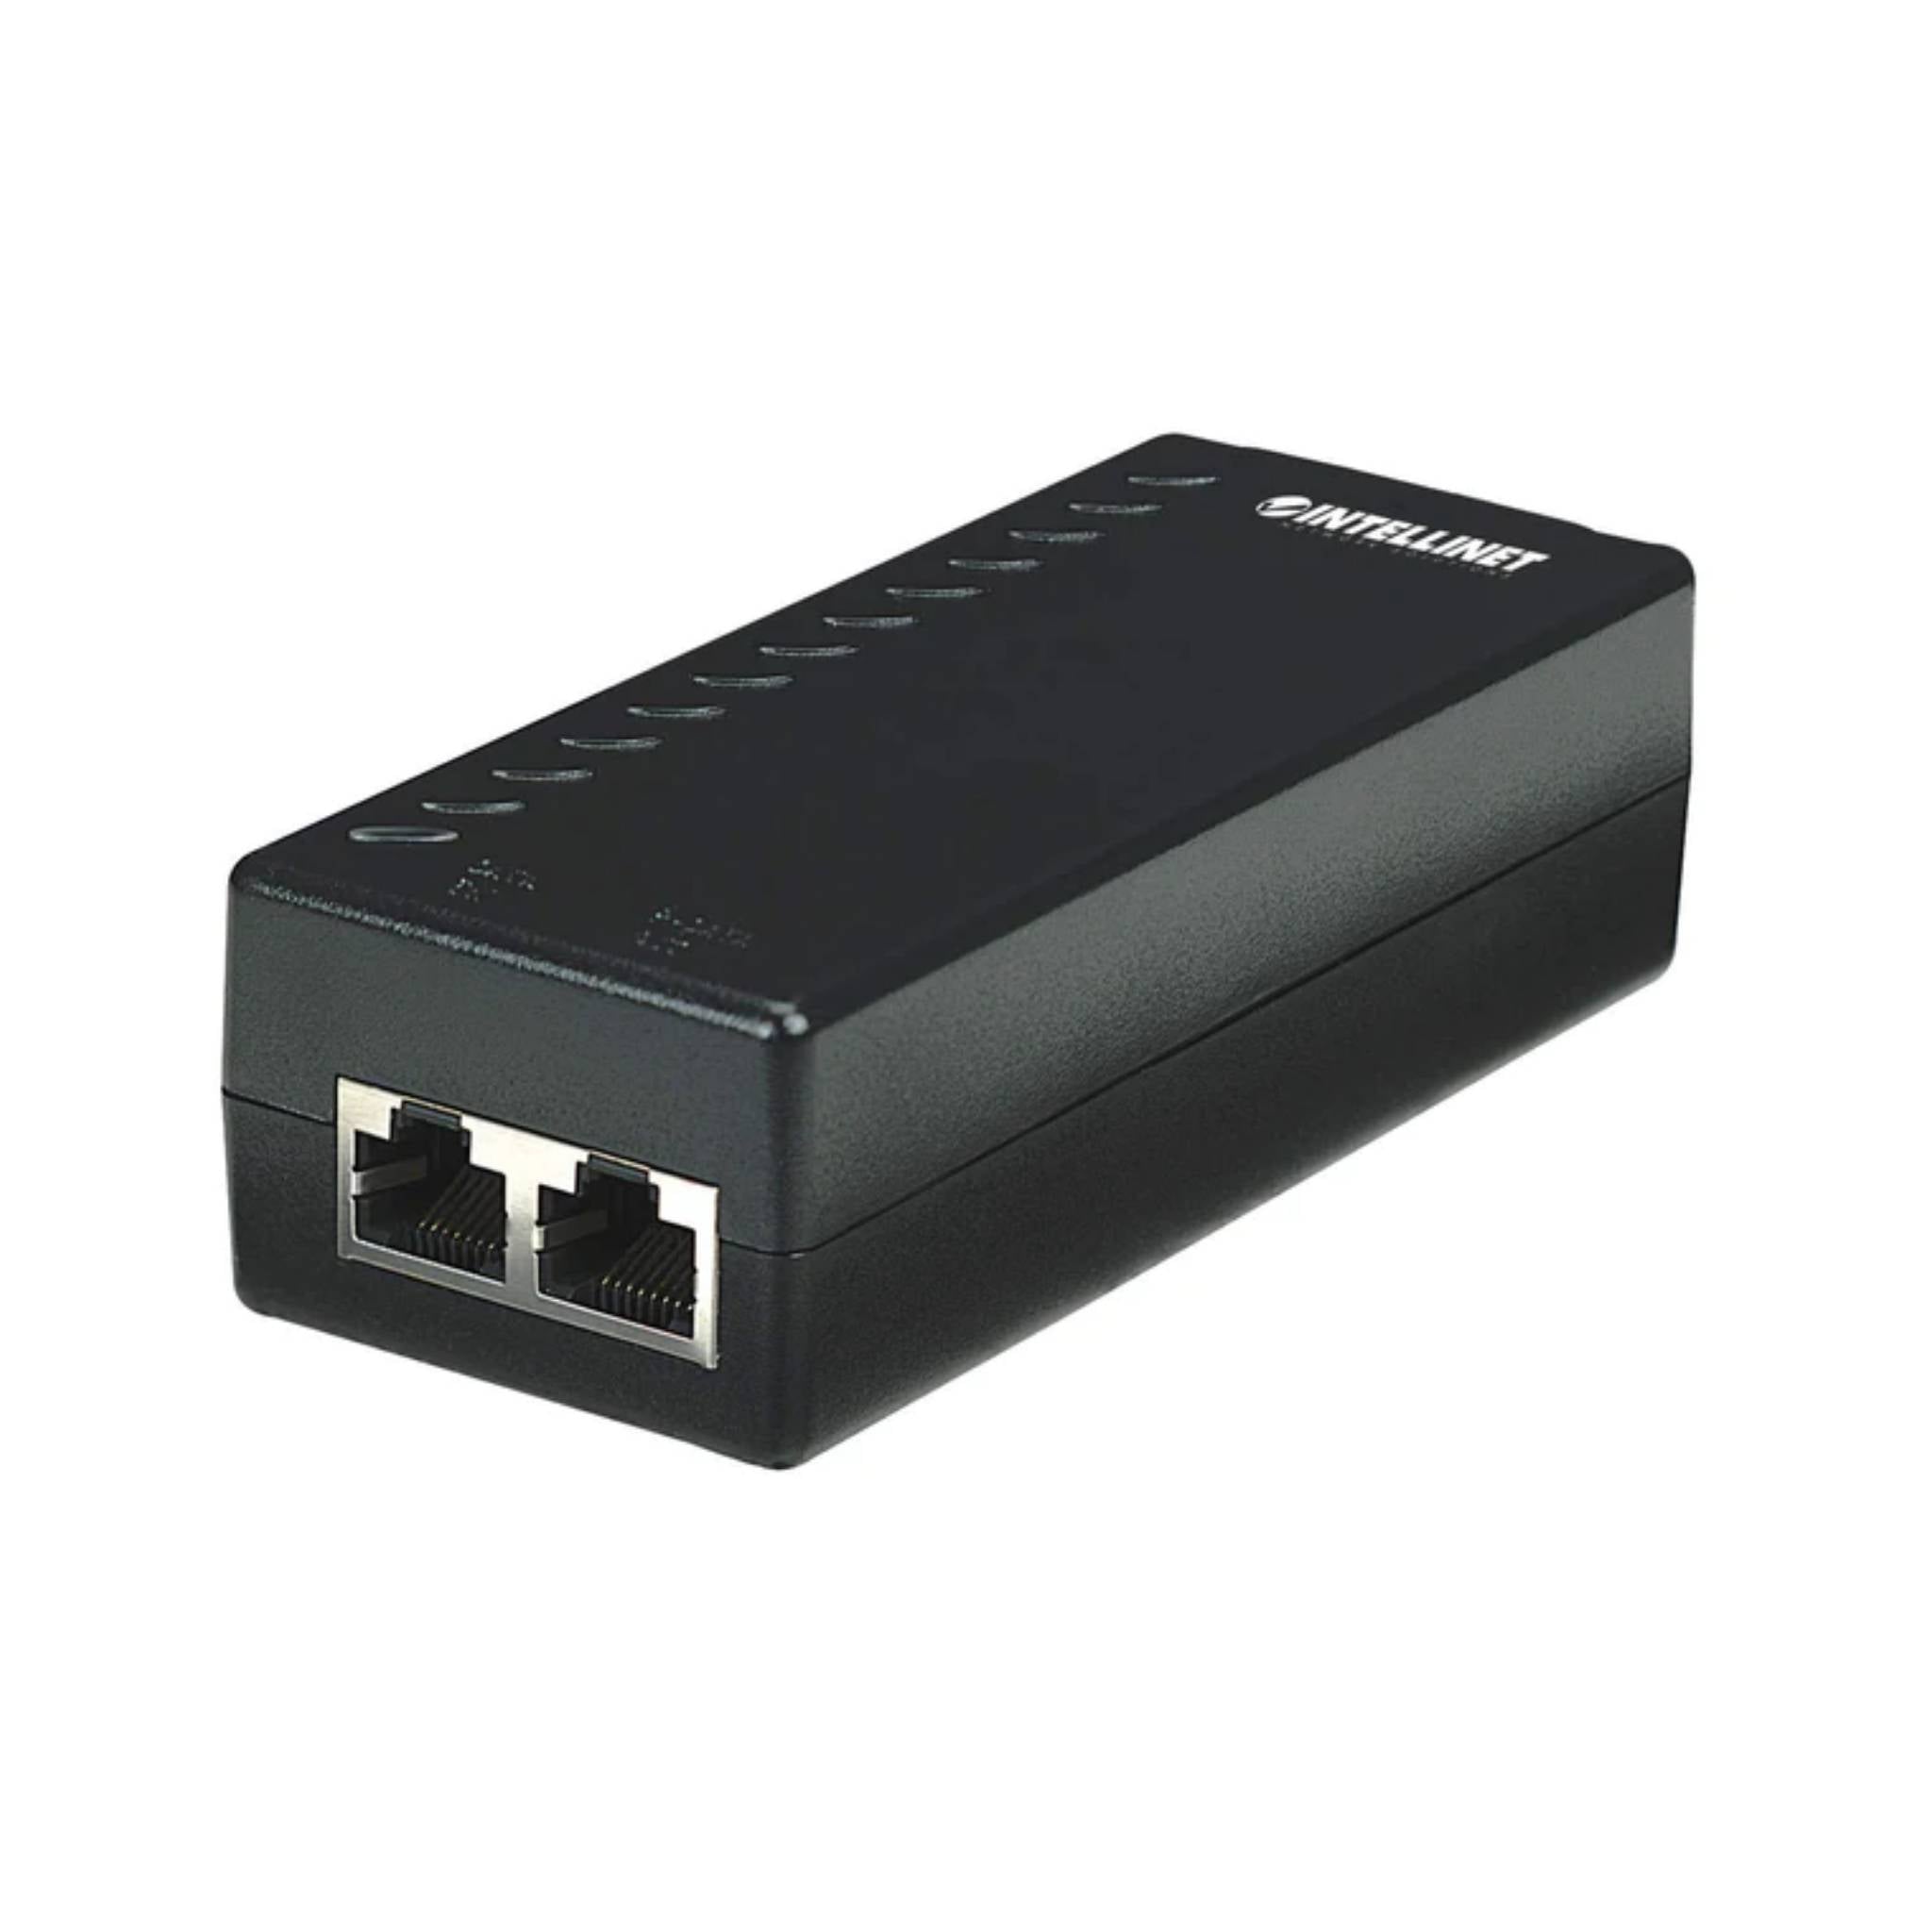 48VDC 15.4W PoE Injector with Plastic Housing for Power Over Ethernet Networking